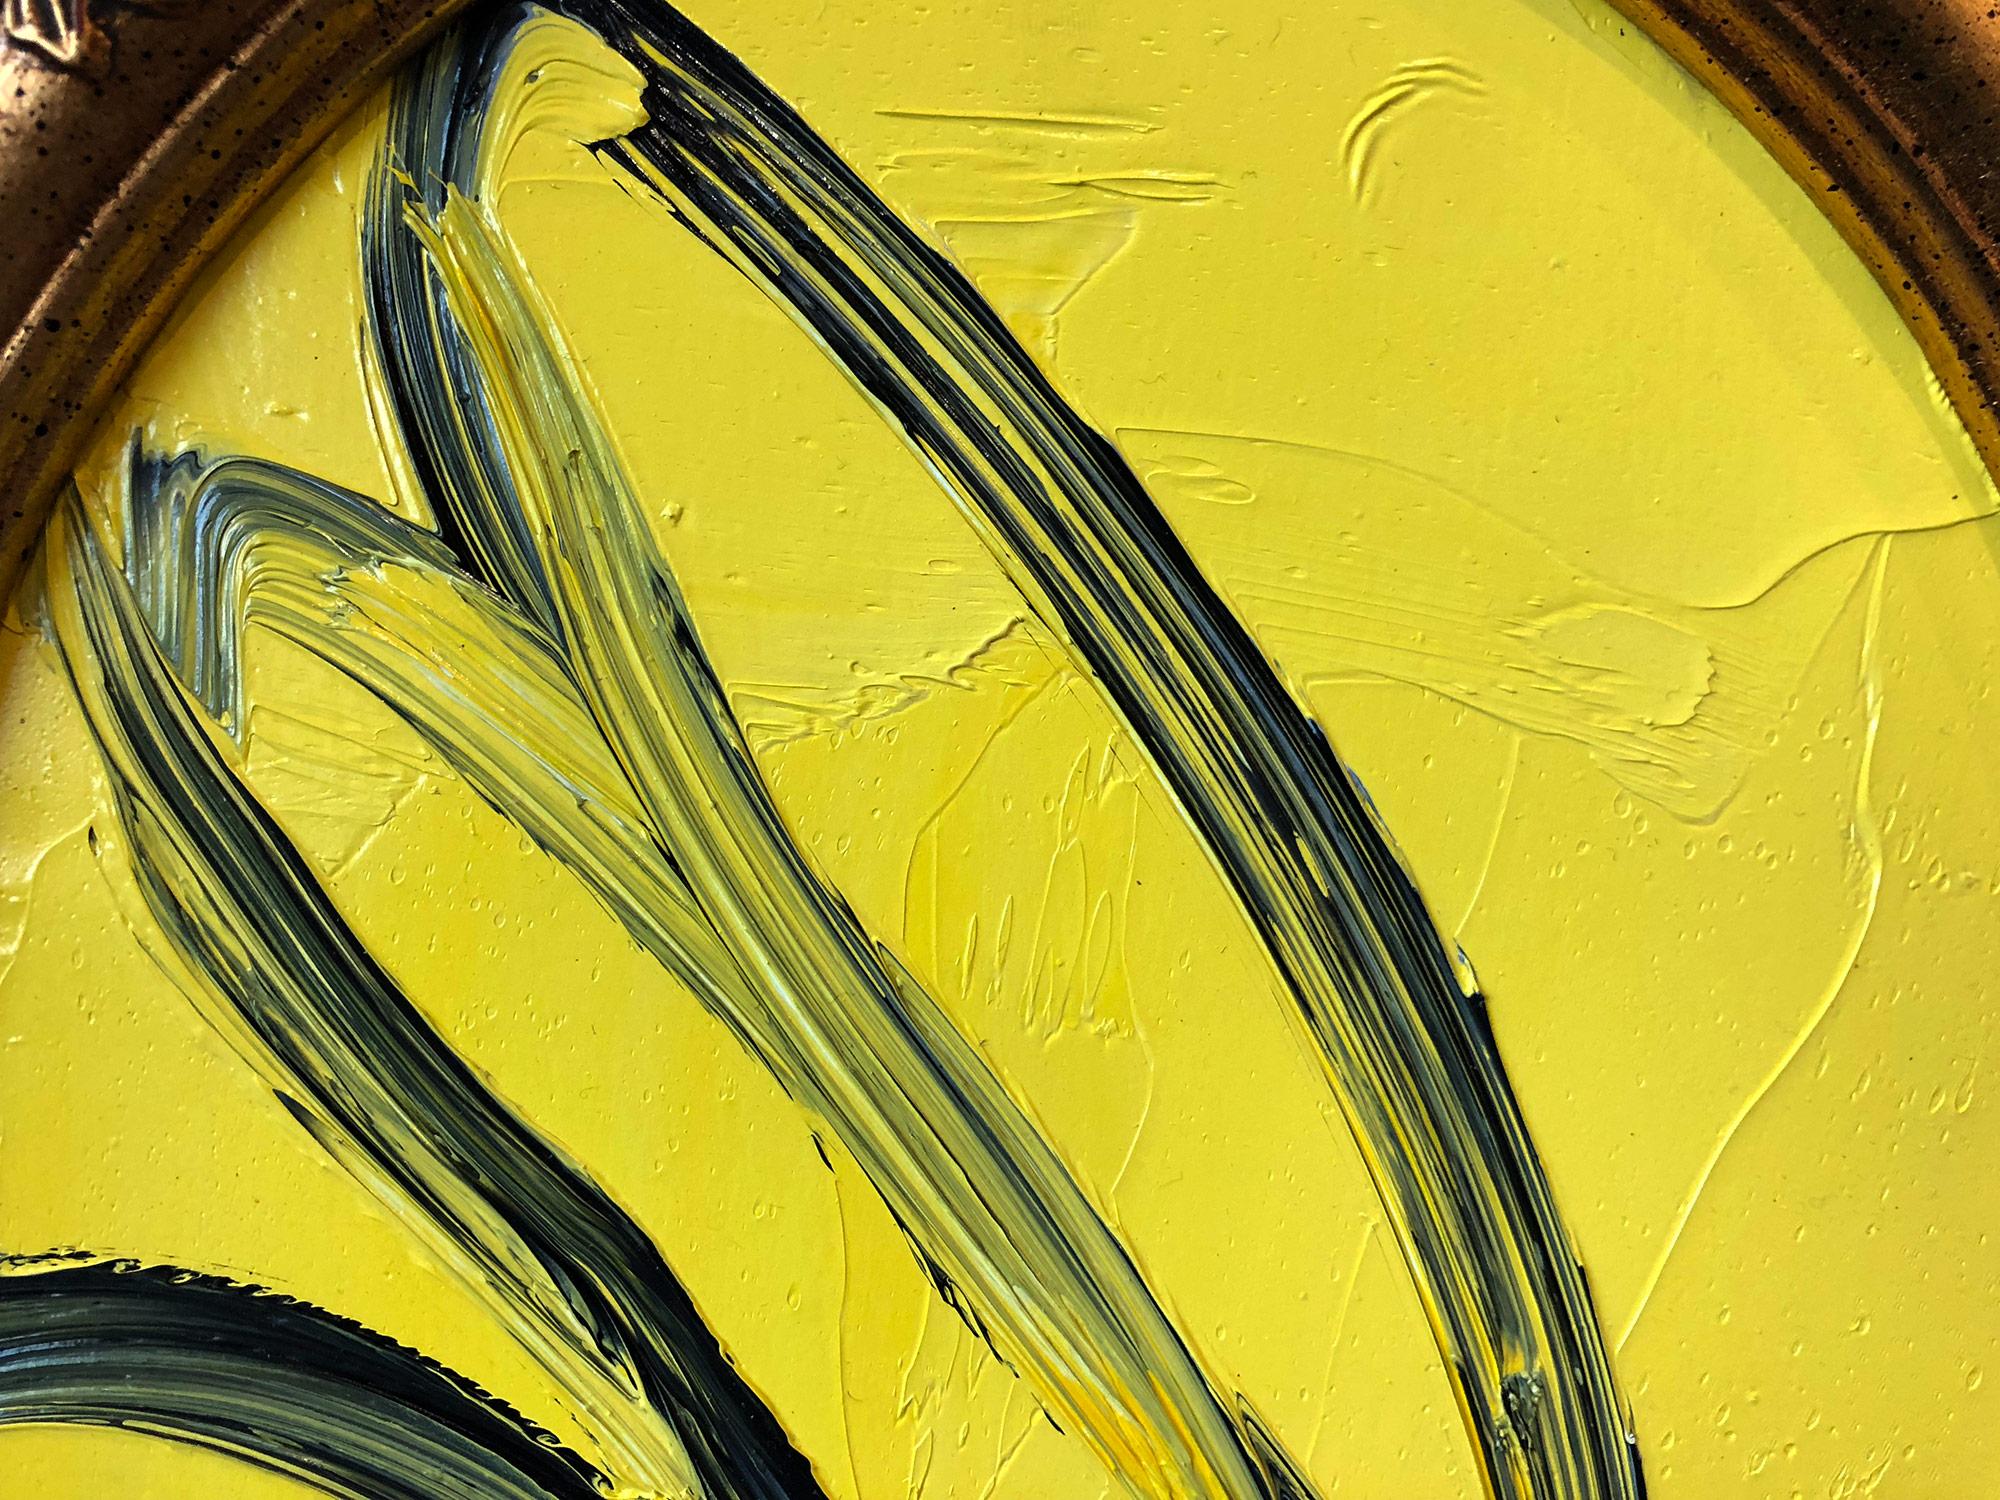 A wonderful composition of one of Slonem's most iconic subjects, Bunnies. This piece depicts a gestural figure of a black bunny on a yellow background with thick use of paint. It is housed in a wonderful oval frame. Inspired by nature and a genuine